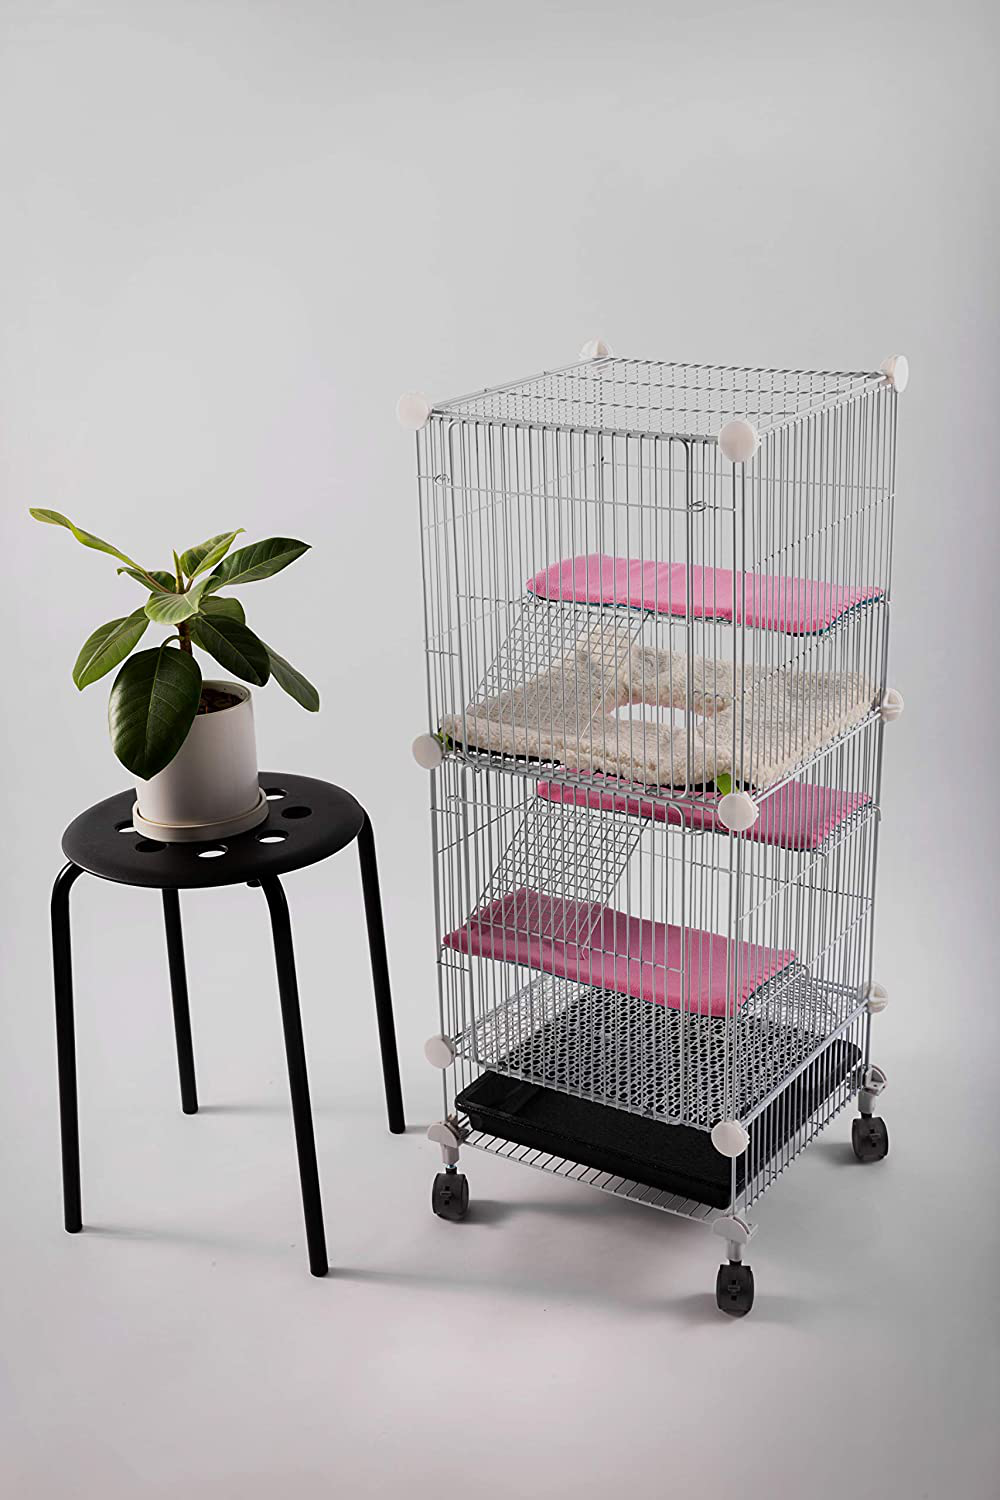 Pet Hutch Cages for Hamster, Rat or Other Small Animals Indoor, Expandable and Stackable, 14X14X28 In